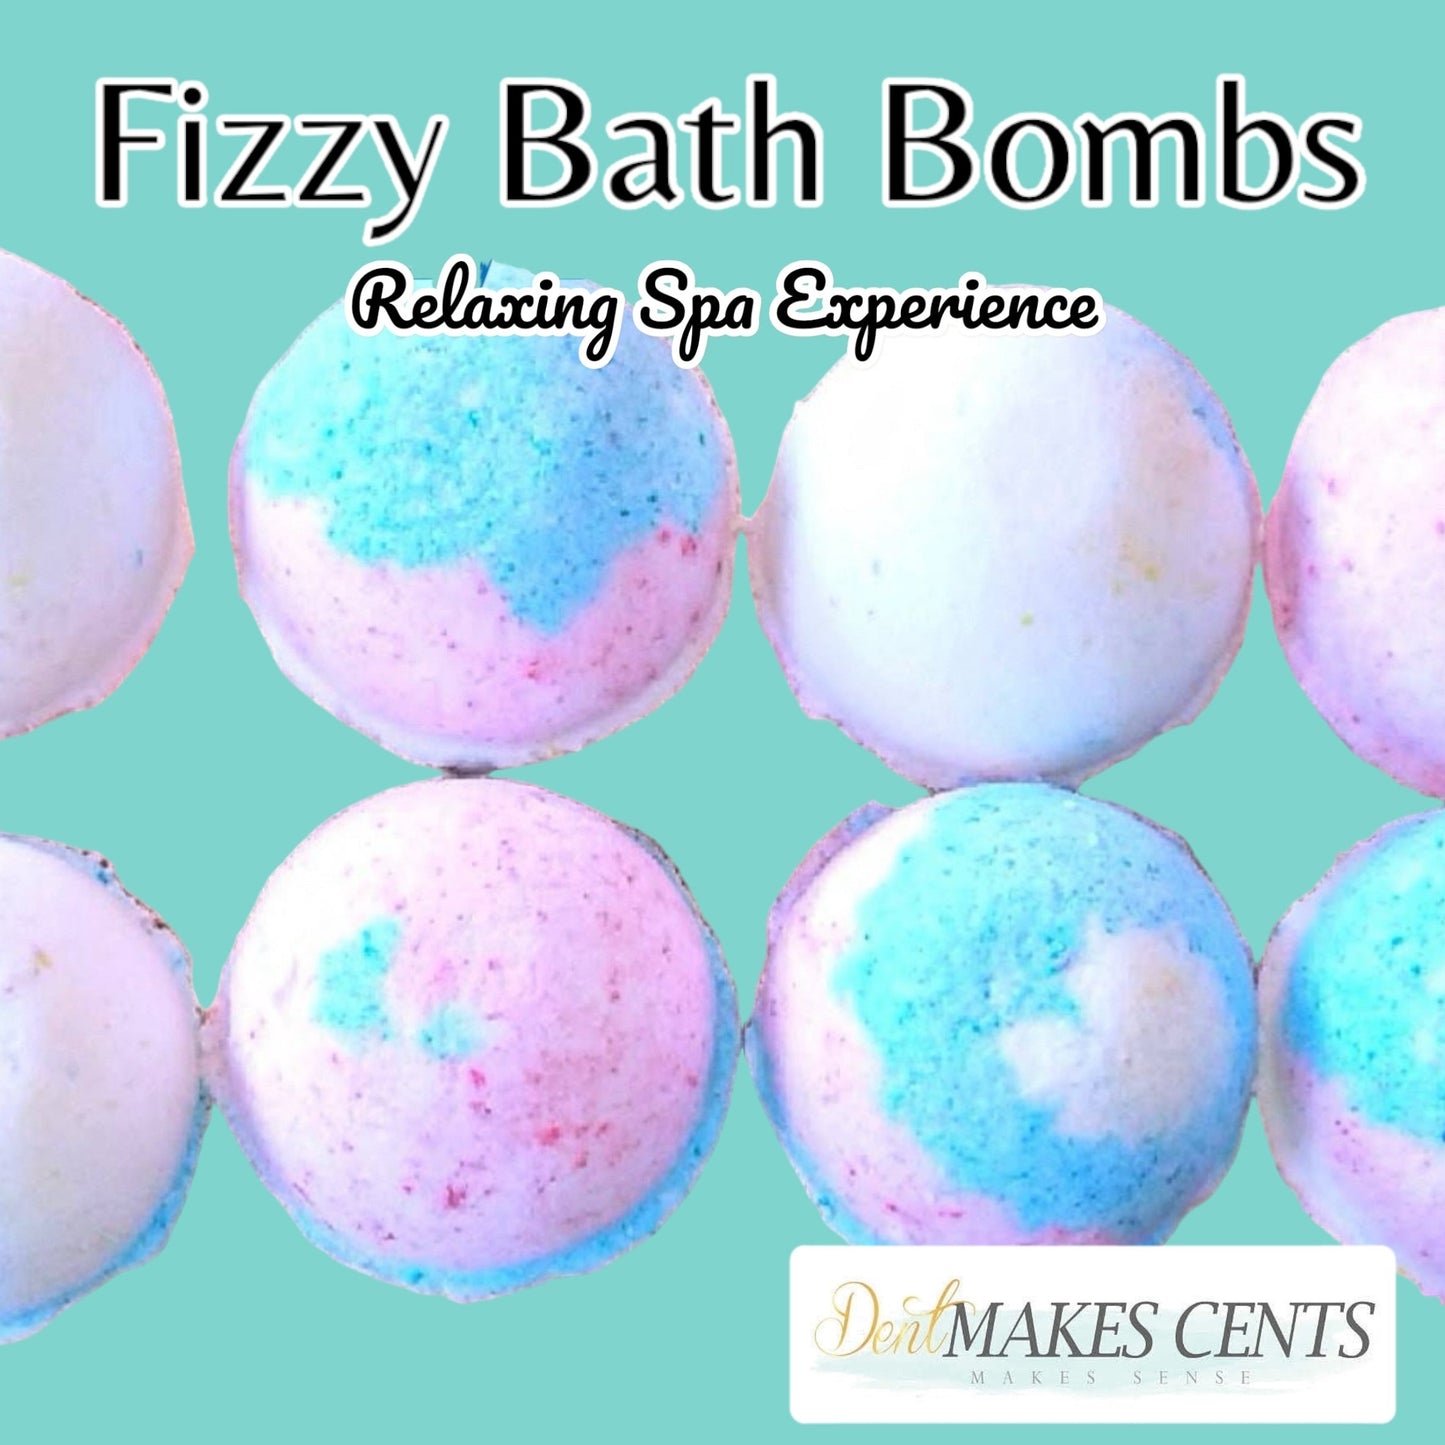 Fizzy Bath Bombs (10 pack)